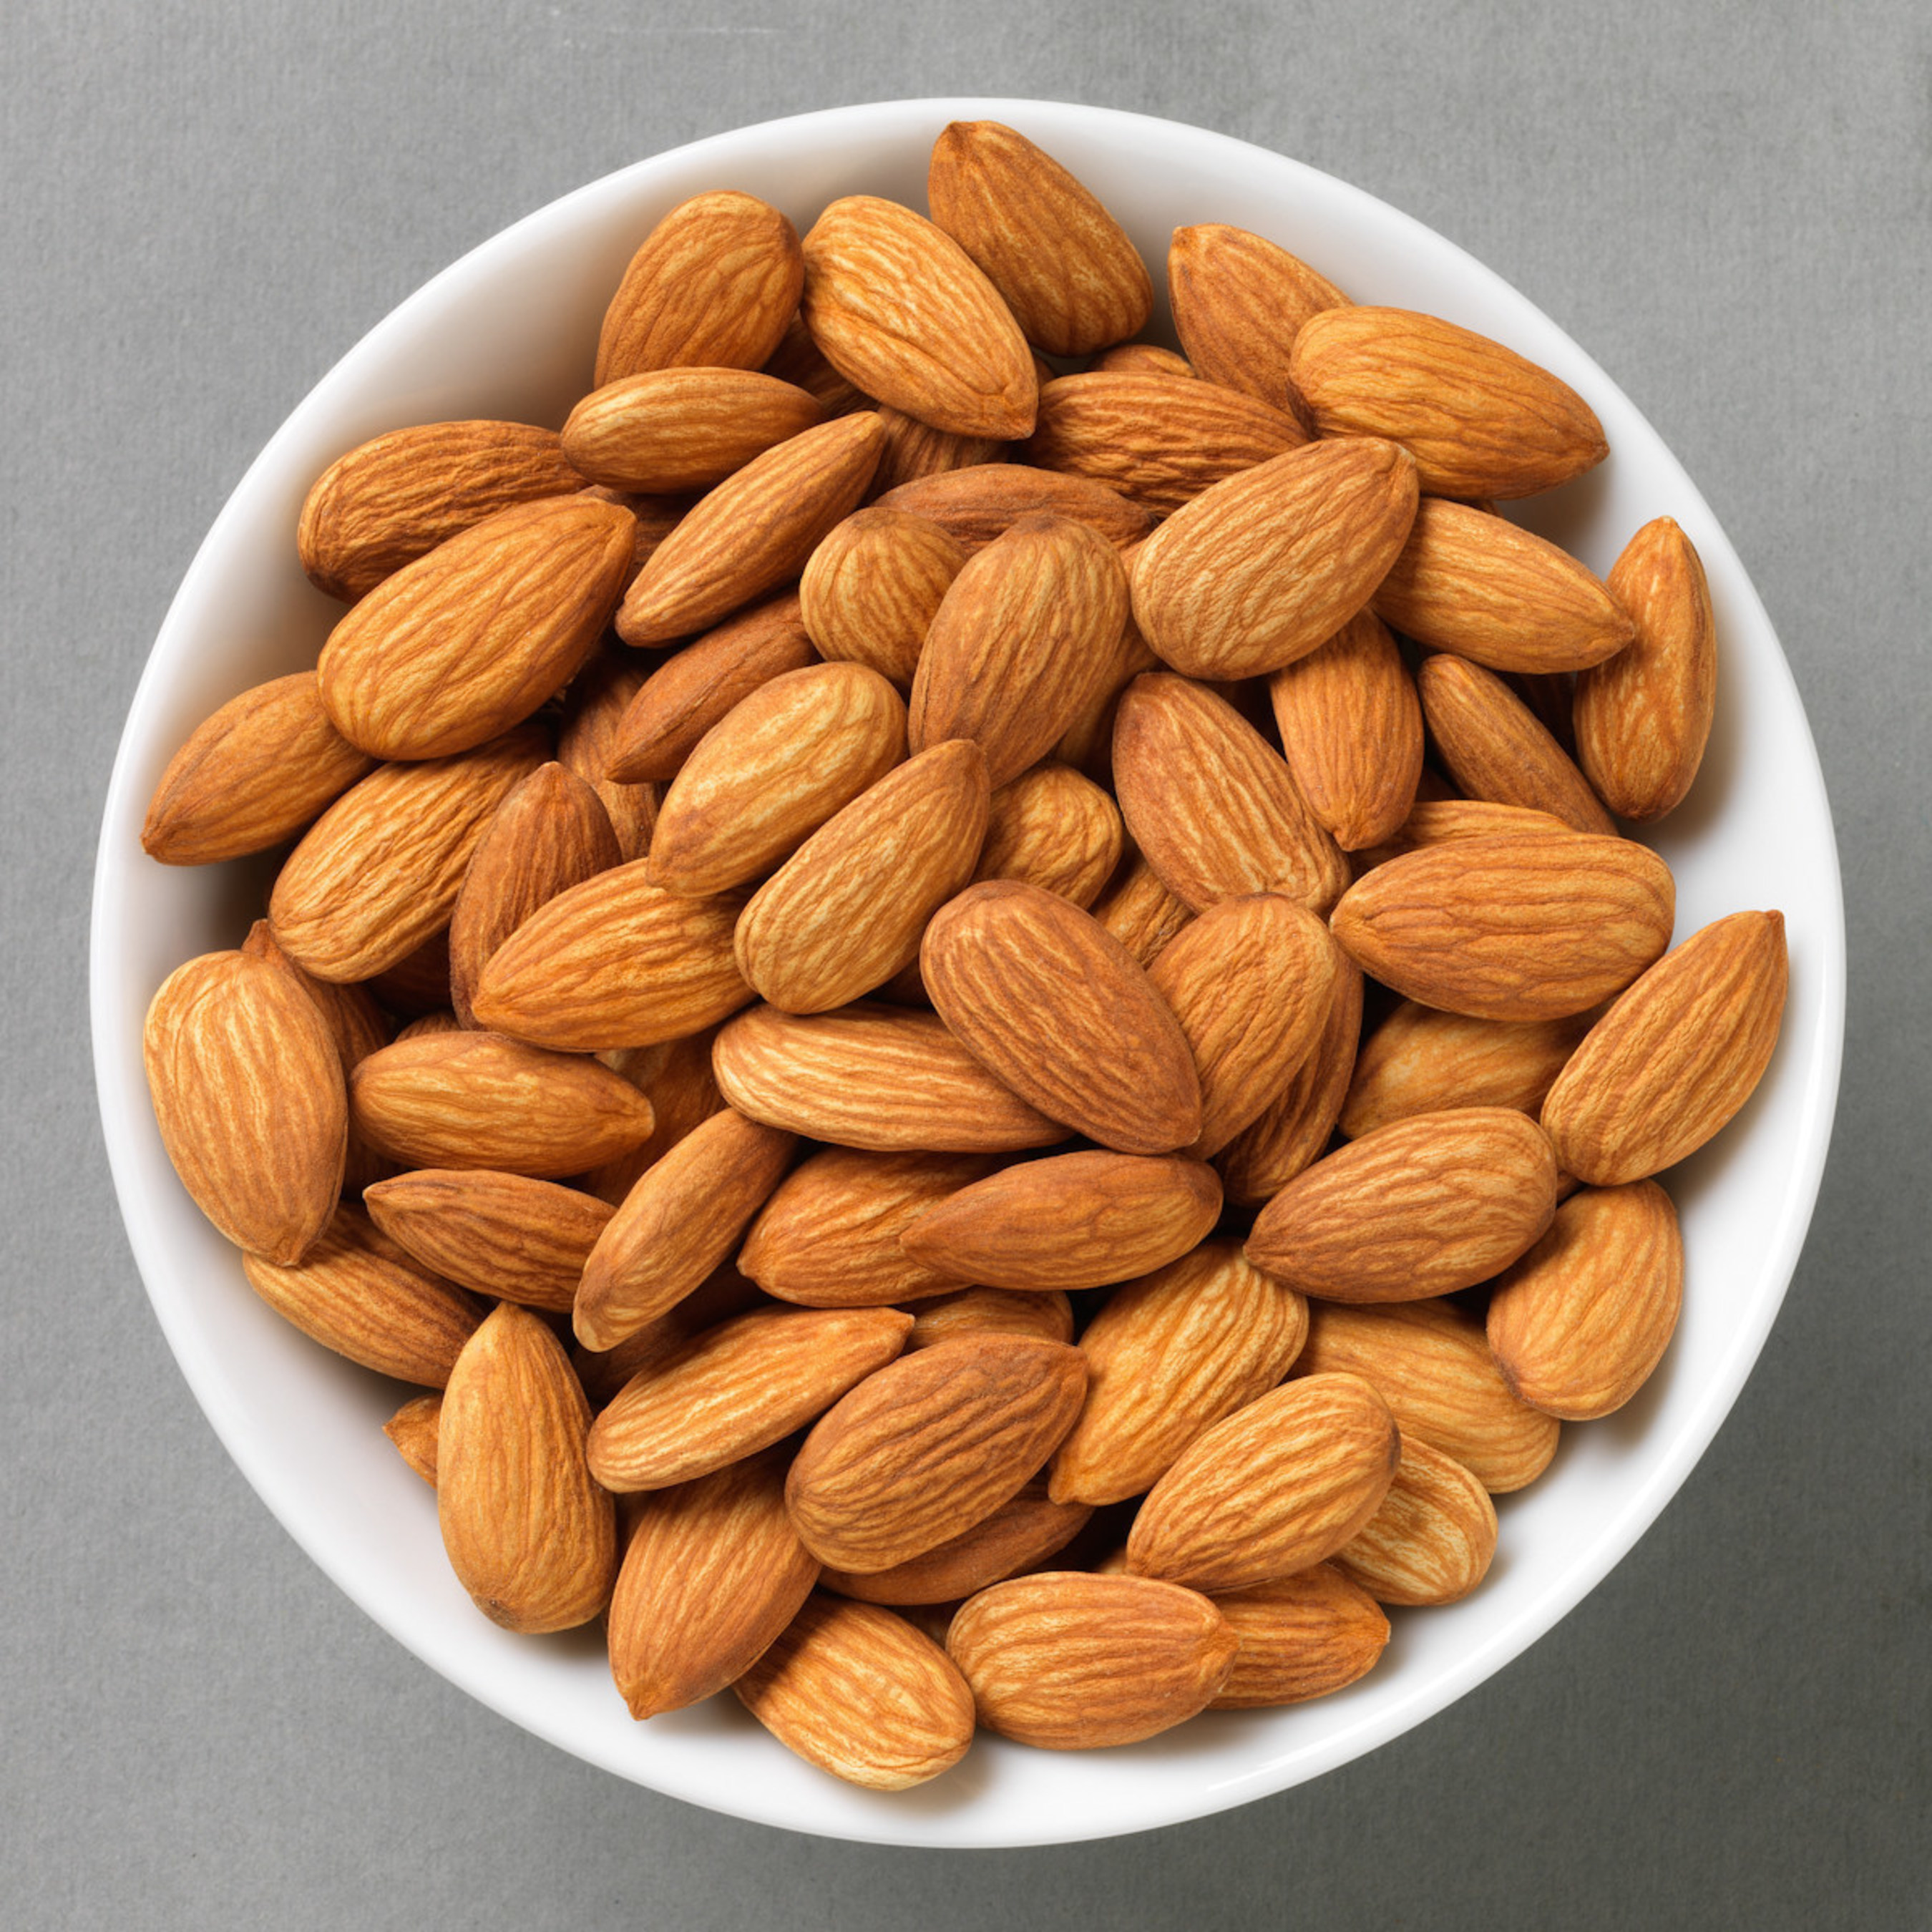 Bowl of Almonds.